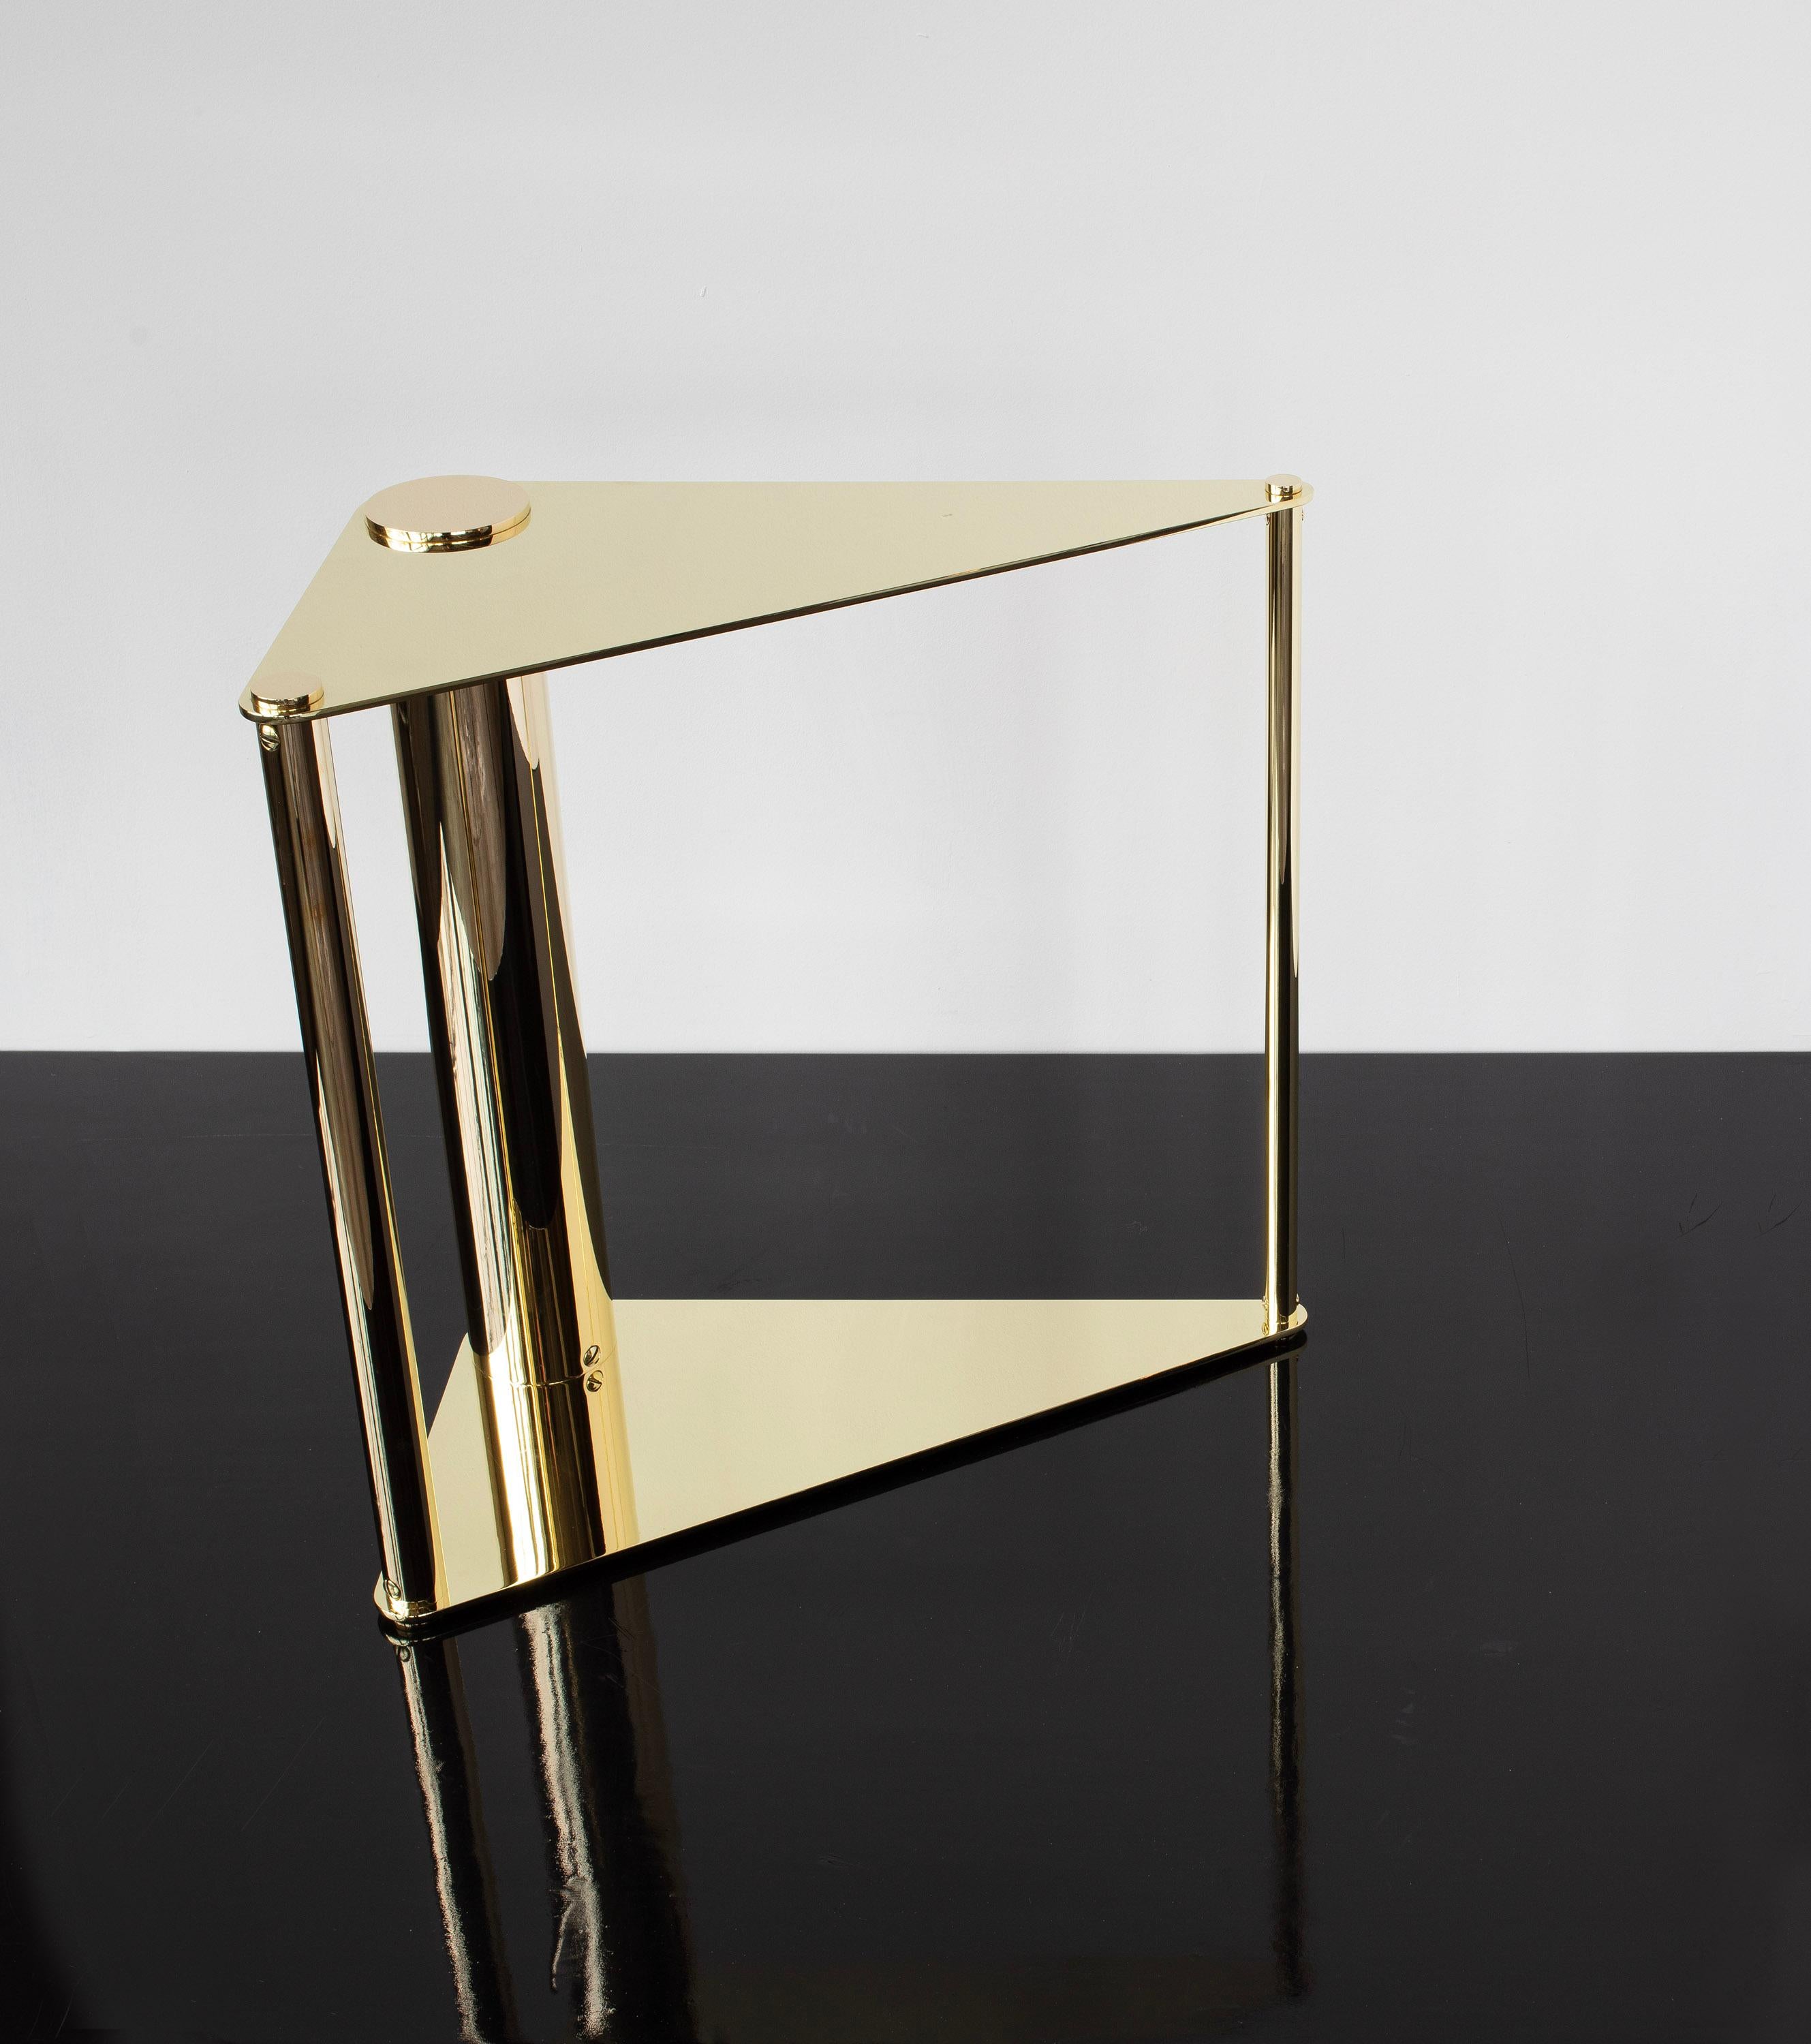 Solid machined brass with oval head slotted fasteners. The triangular design is completely reversible, being fully finished on both sides.  This allows the table to be flipped to either side so the angle of the triangle can be mirrored.  Petite